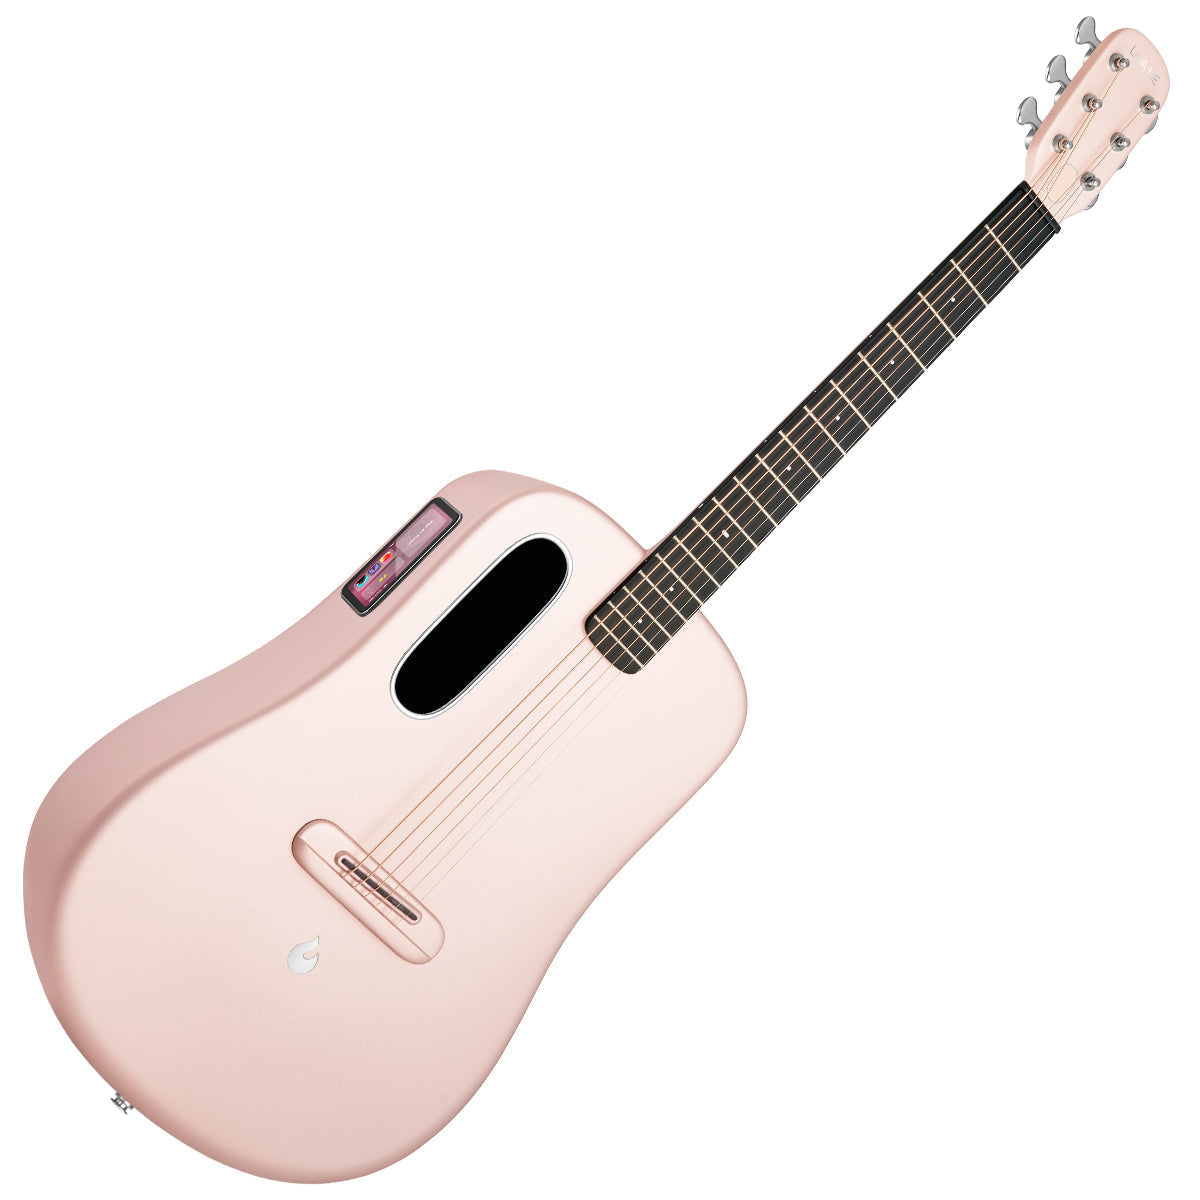 LAVA ME4 Carbon 36" with Space Bag ~ Pink, Acoustic Guitar for sale at Richards Guitars.